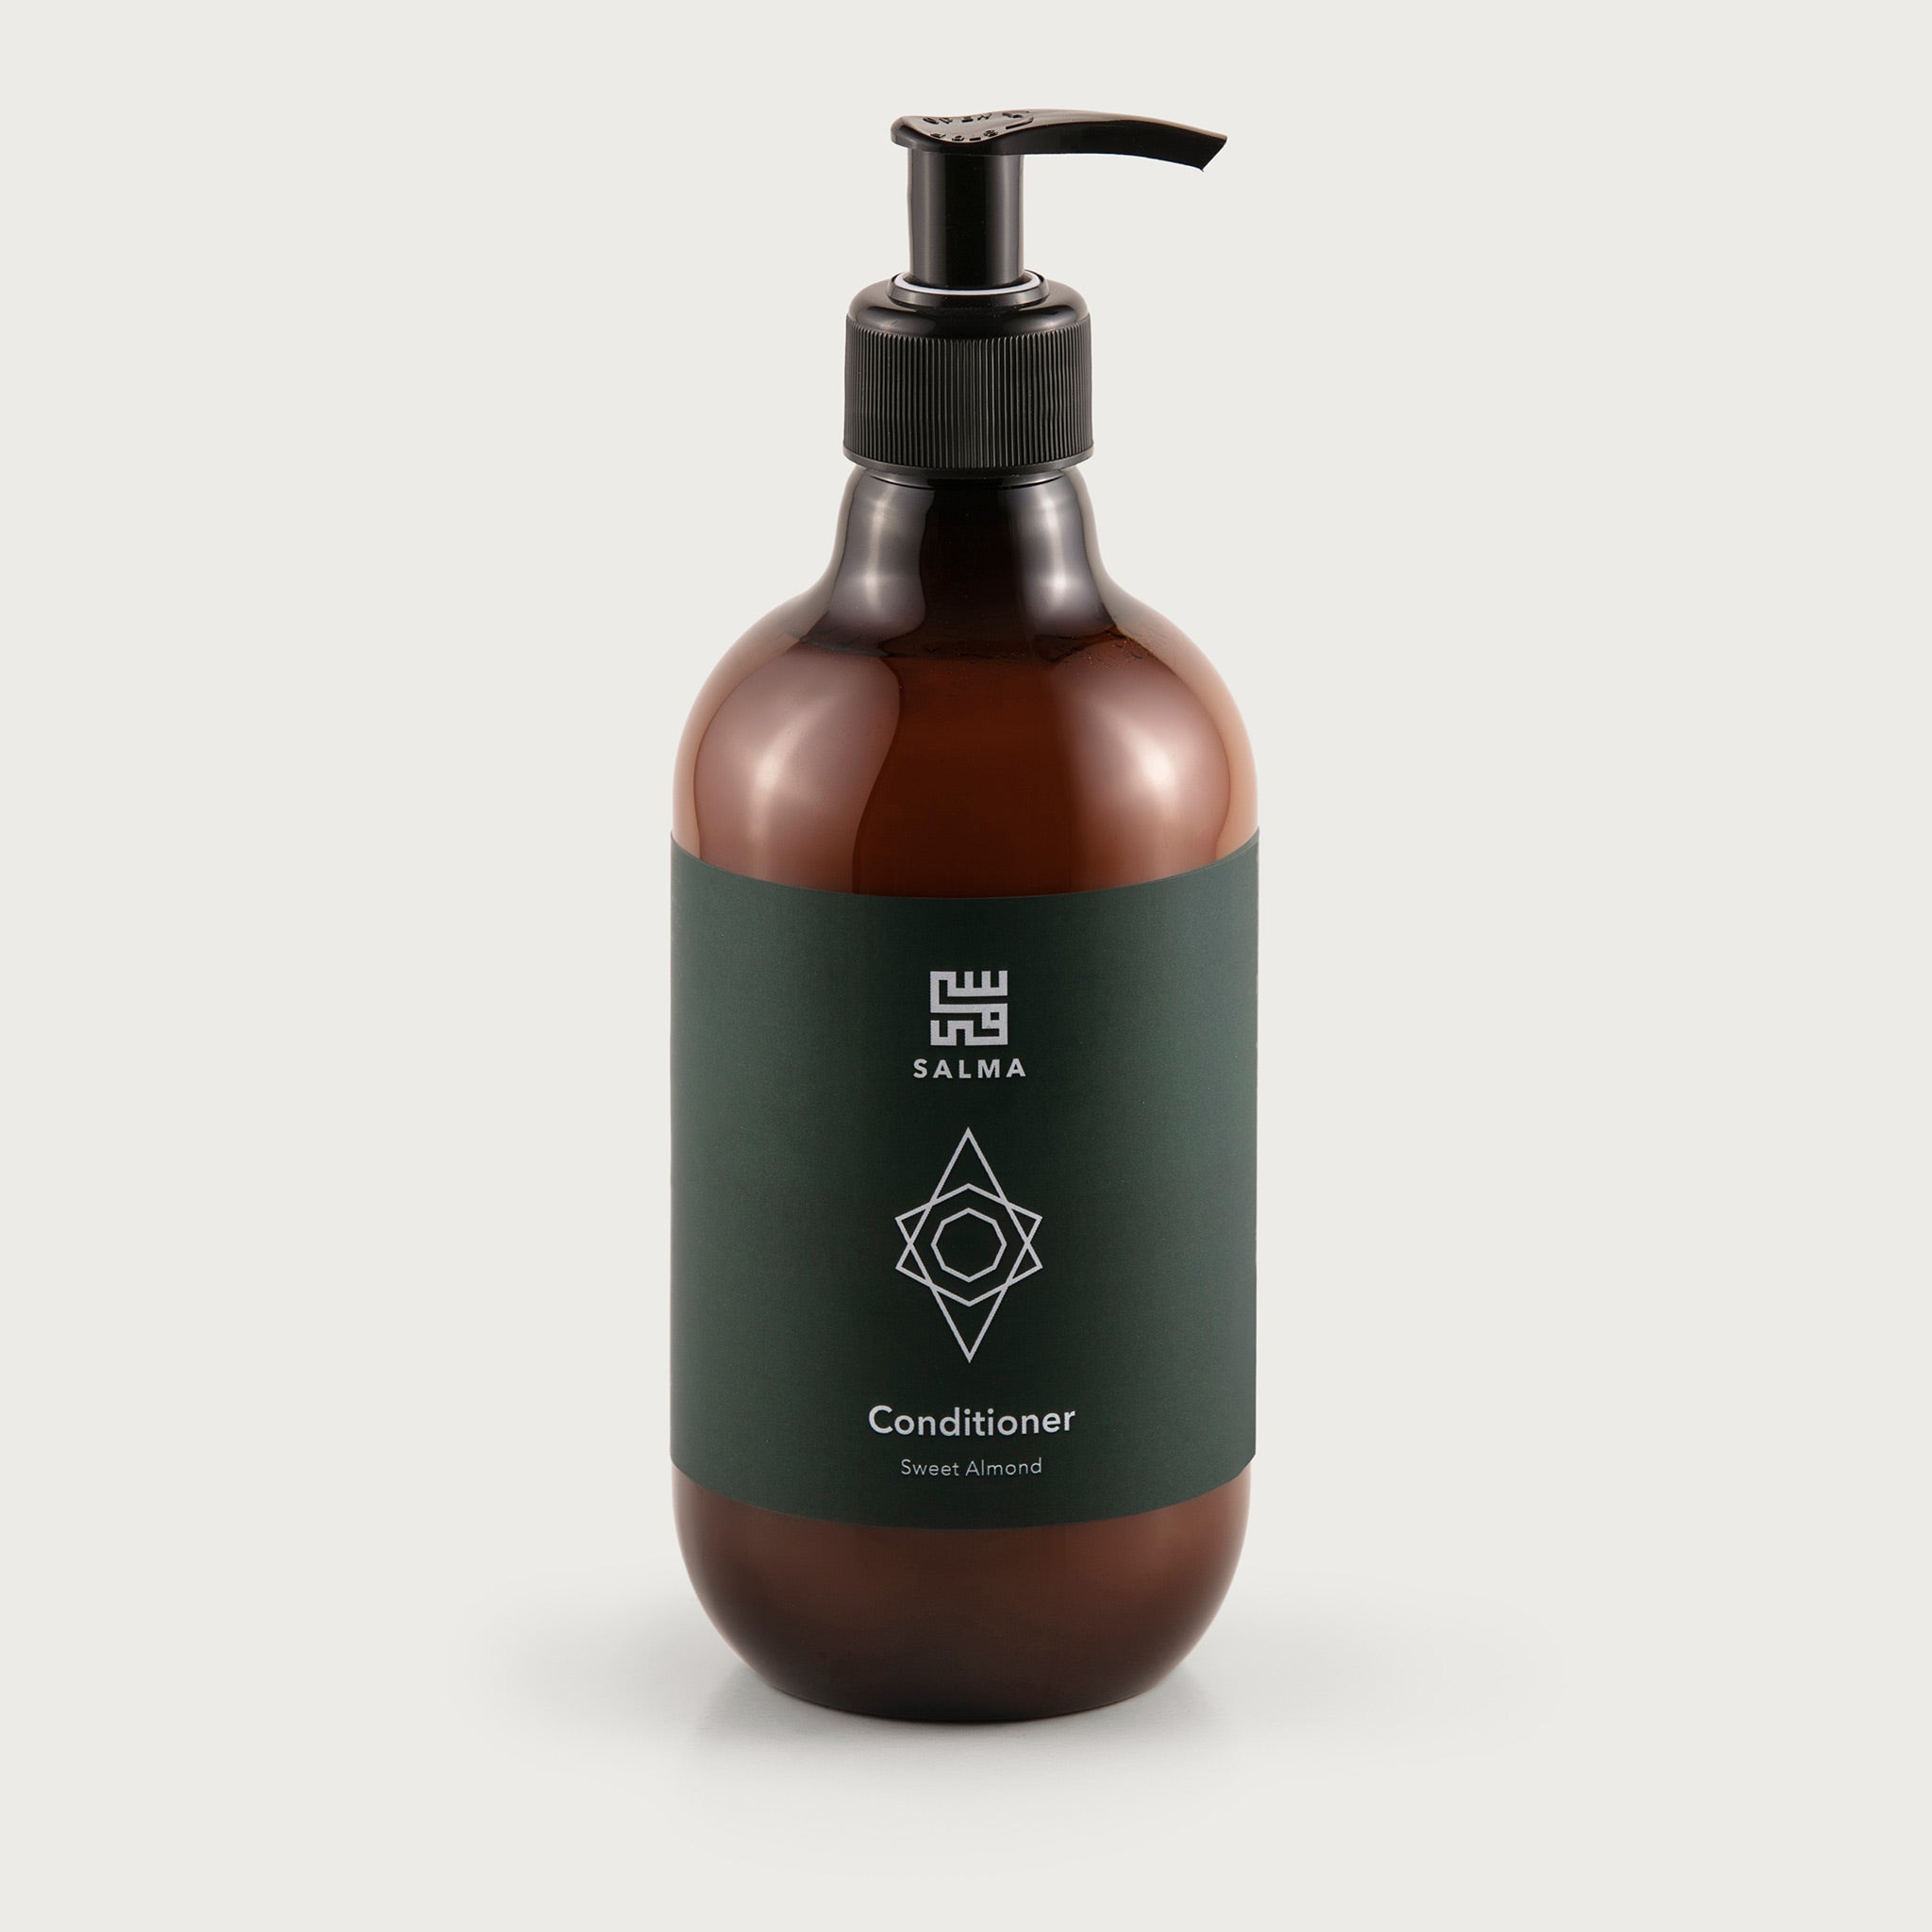 The pump top bottle is amber in color so you can see the creamy conditioner inside. The label is forest green in color with the white Salma logo and the sweet almond scent notated.